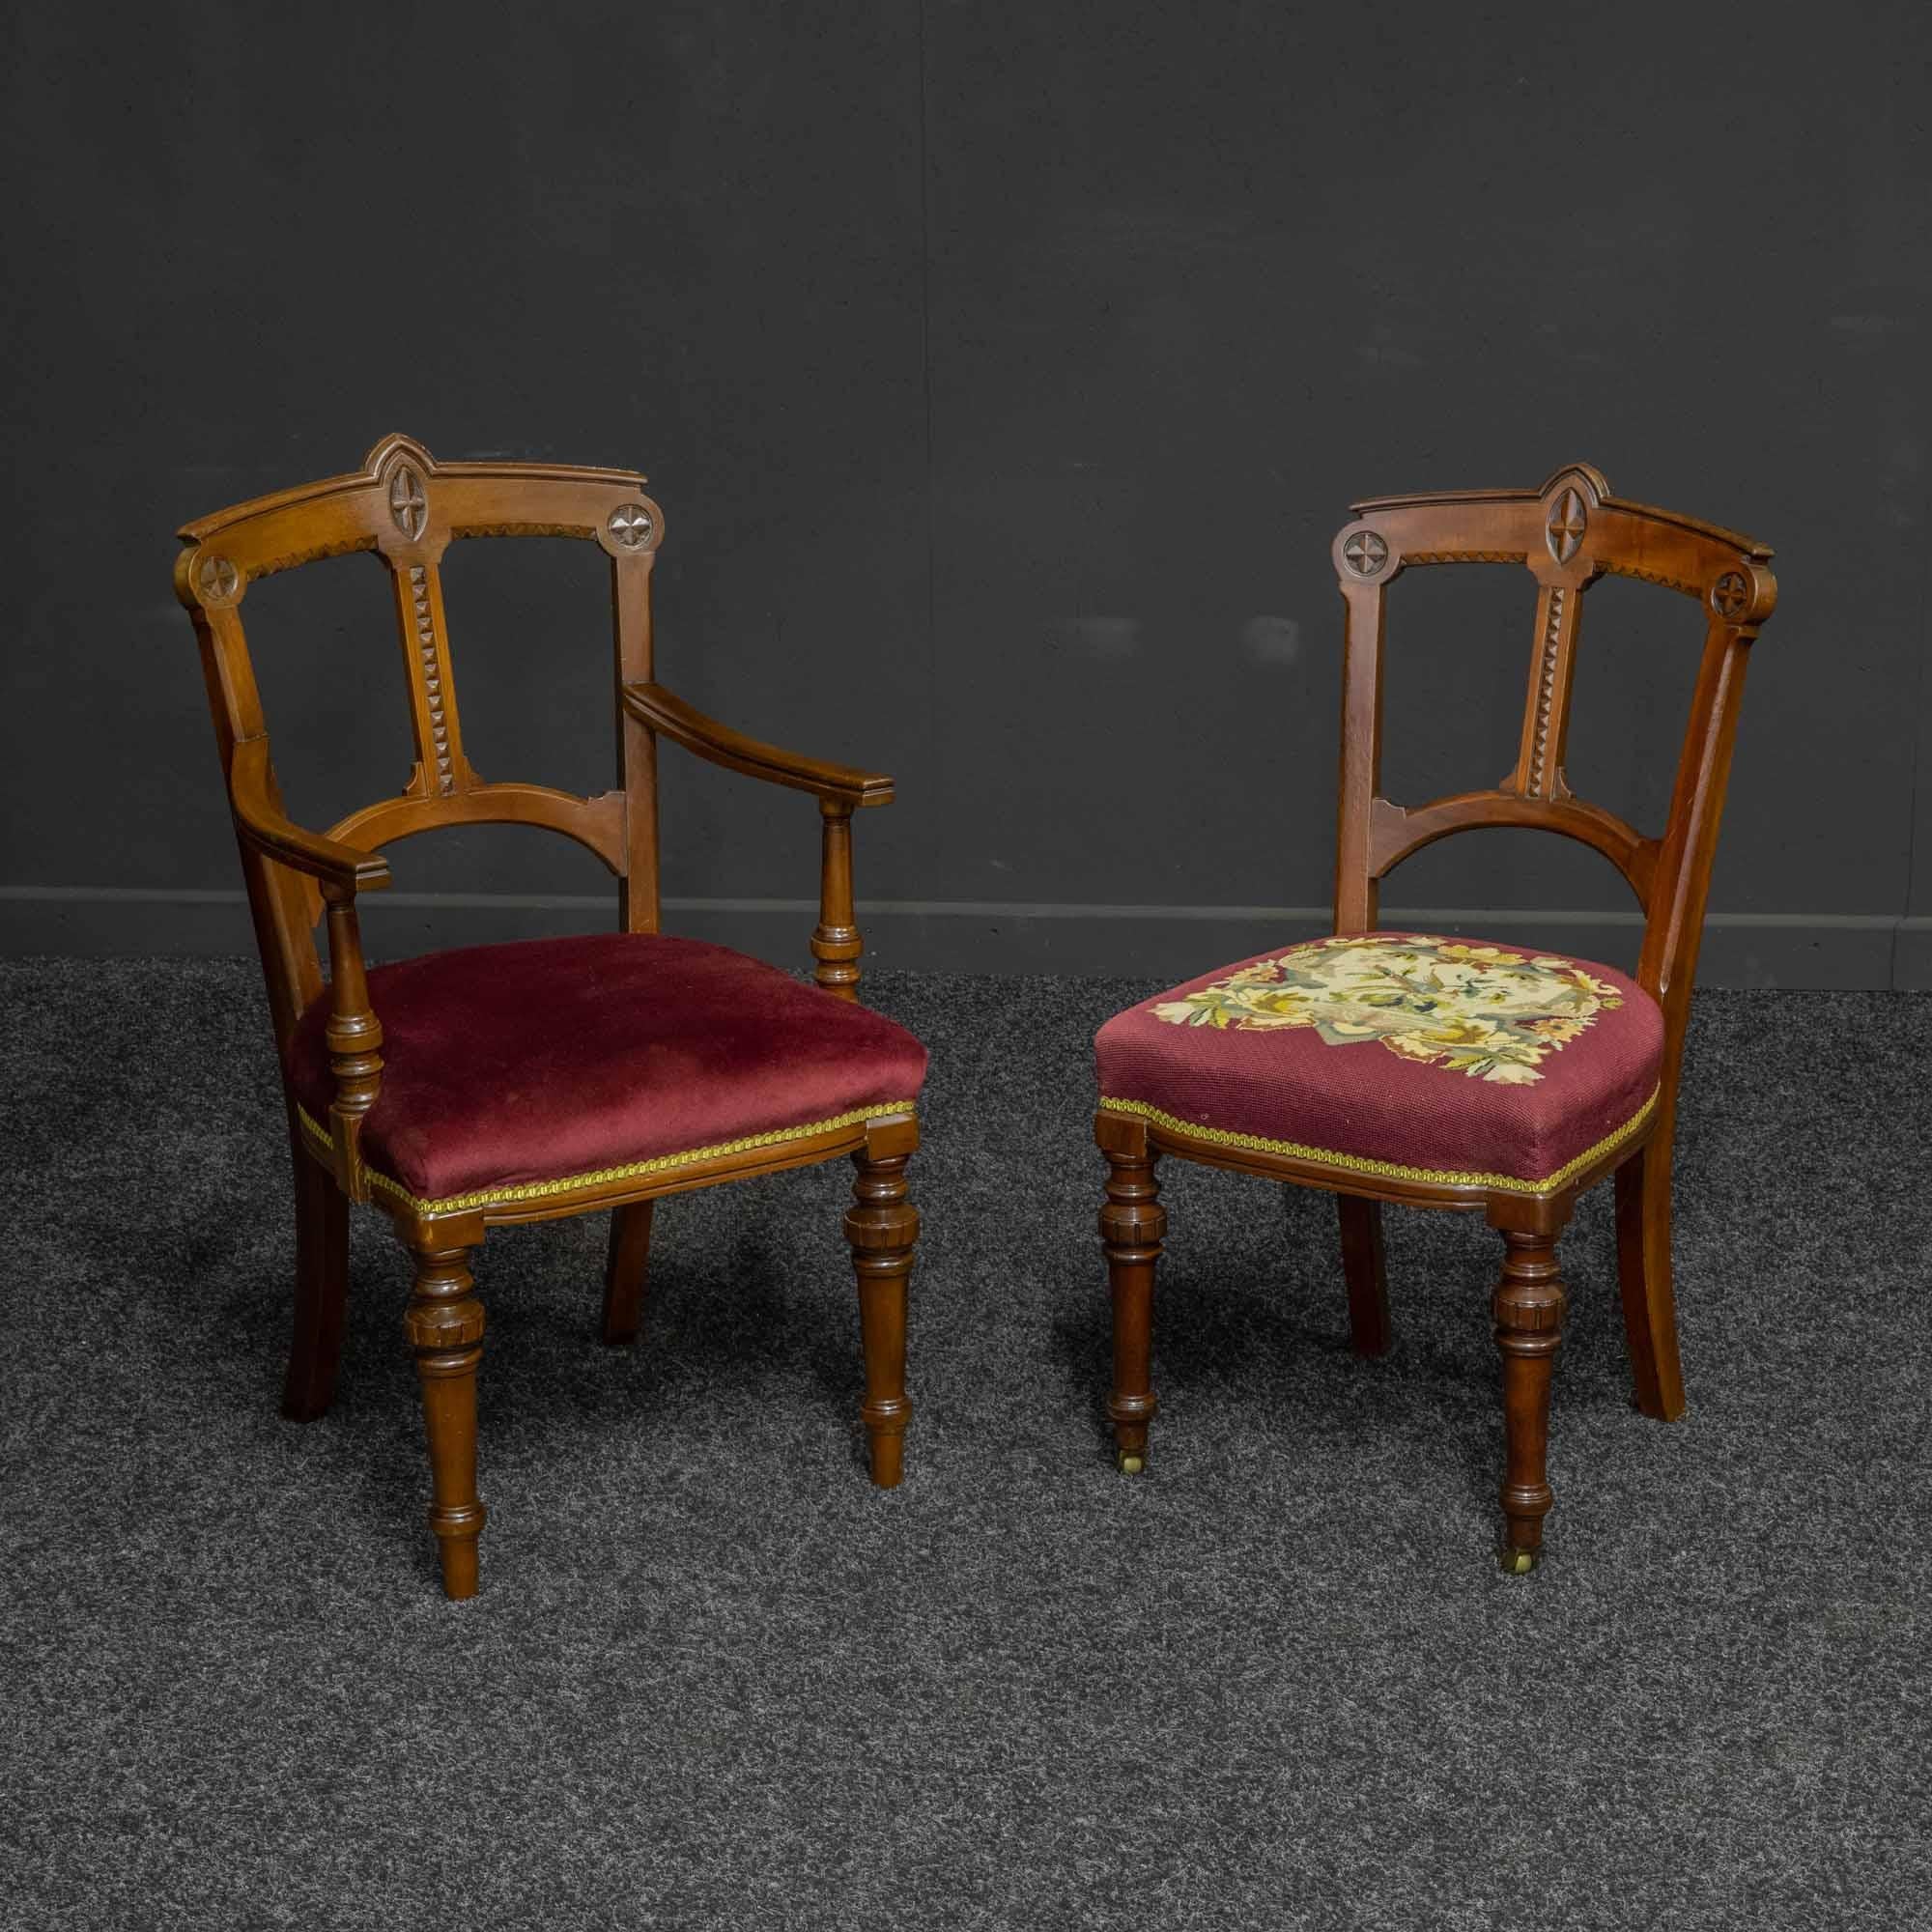 An unusual set of eight (two carvers and six singles) mahogany dining chairs with strong Arts & Crafts overtones within their design. The legs are turned with brass castors to the front on the singles. The single chairs also have their original